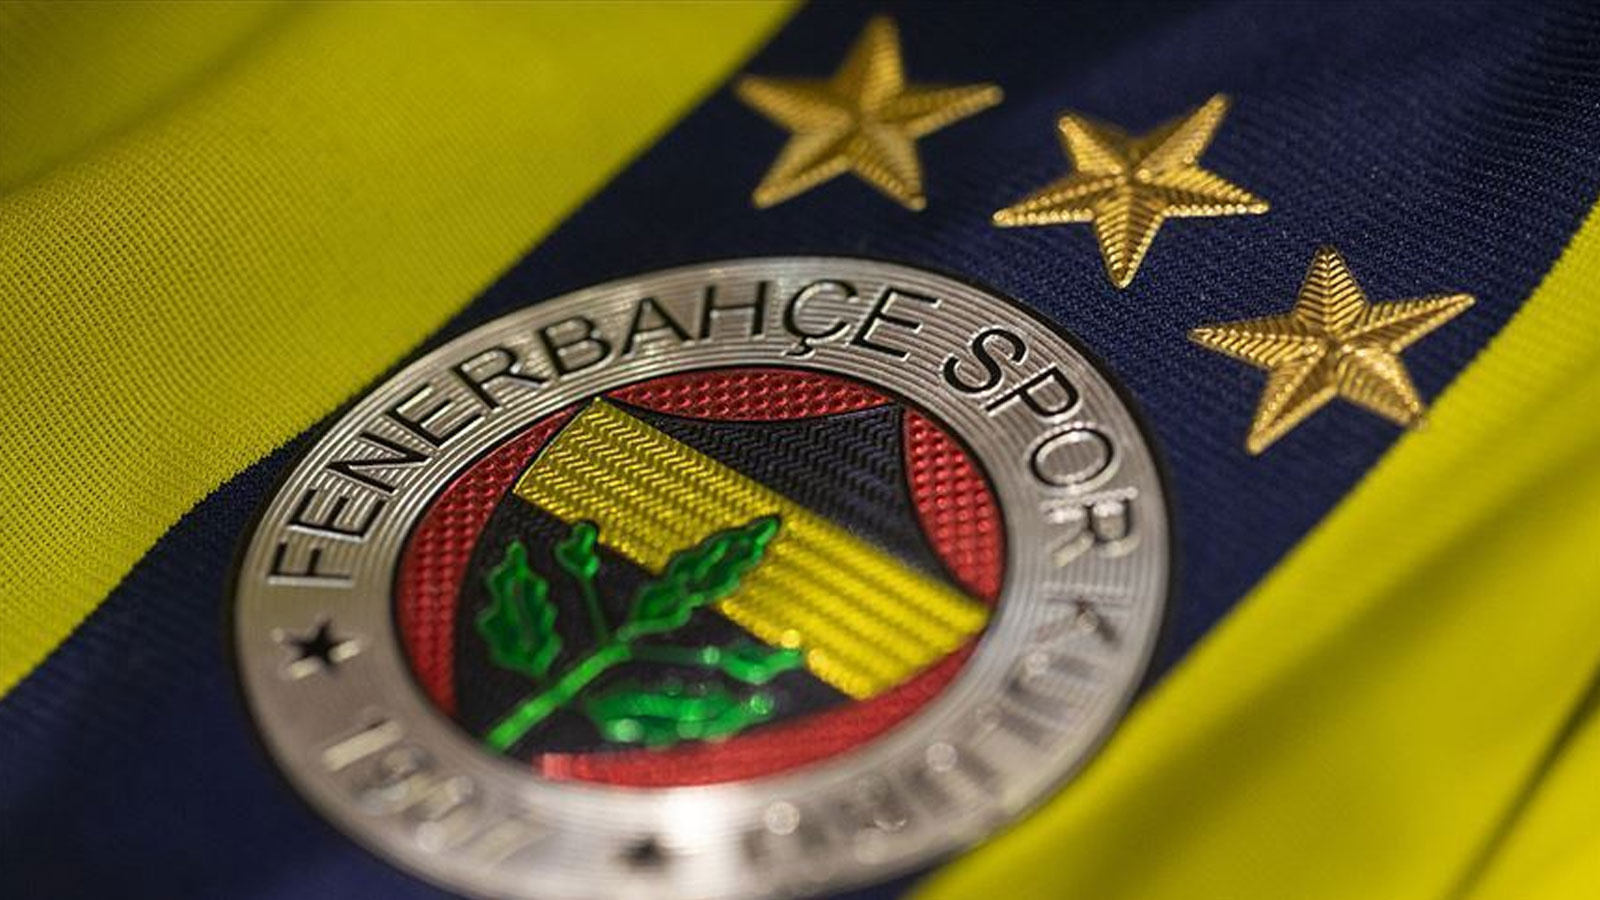 Temporary technical manager announced in Fenerbahçe Today News